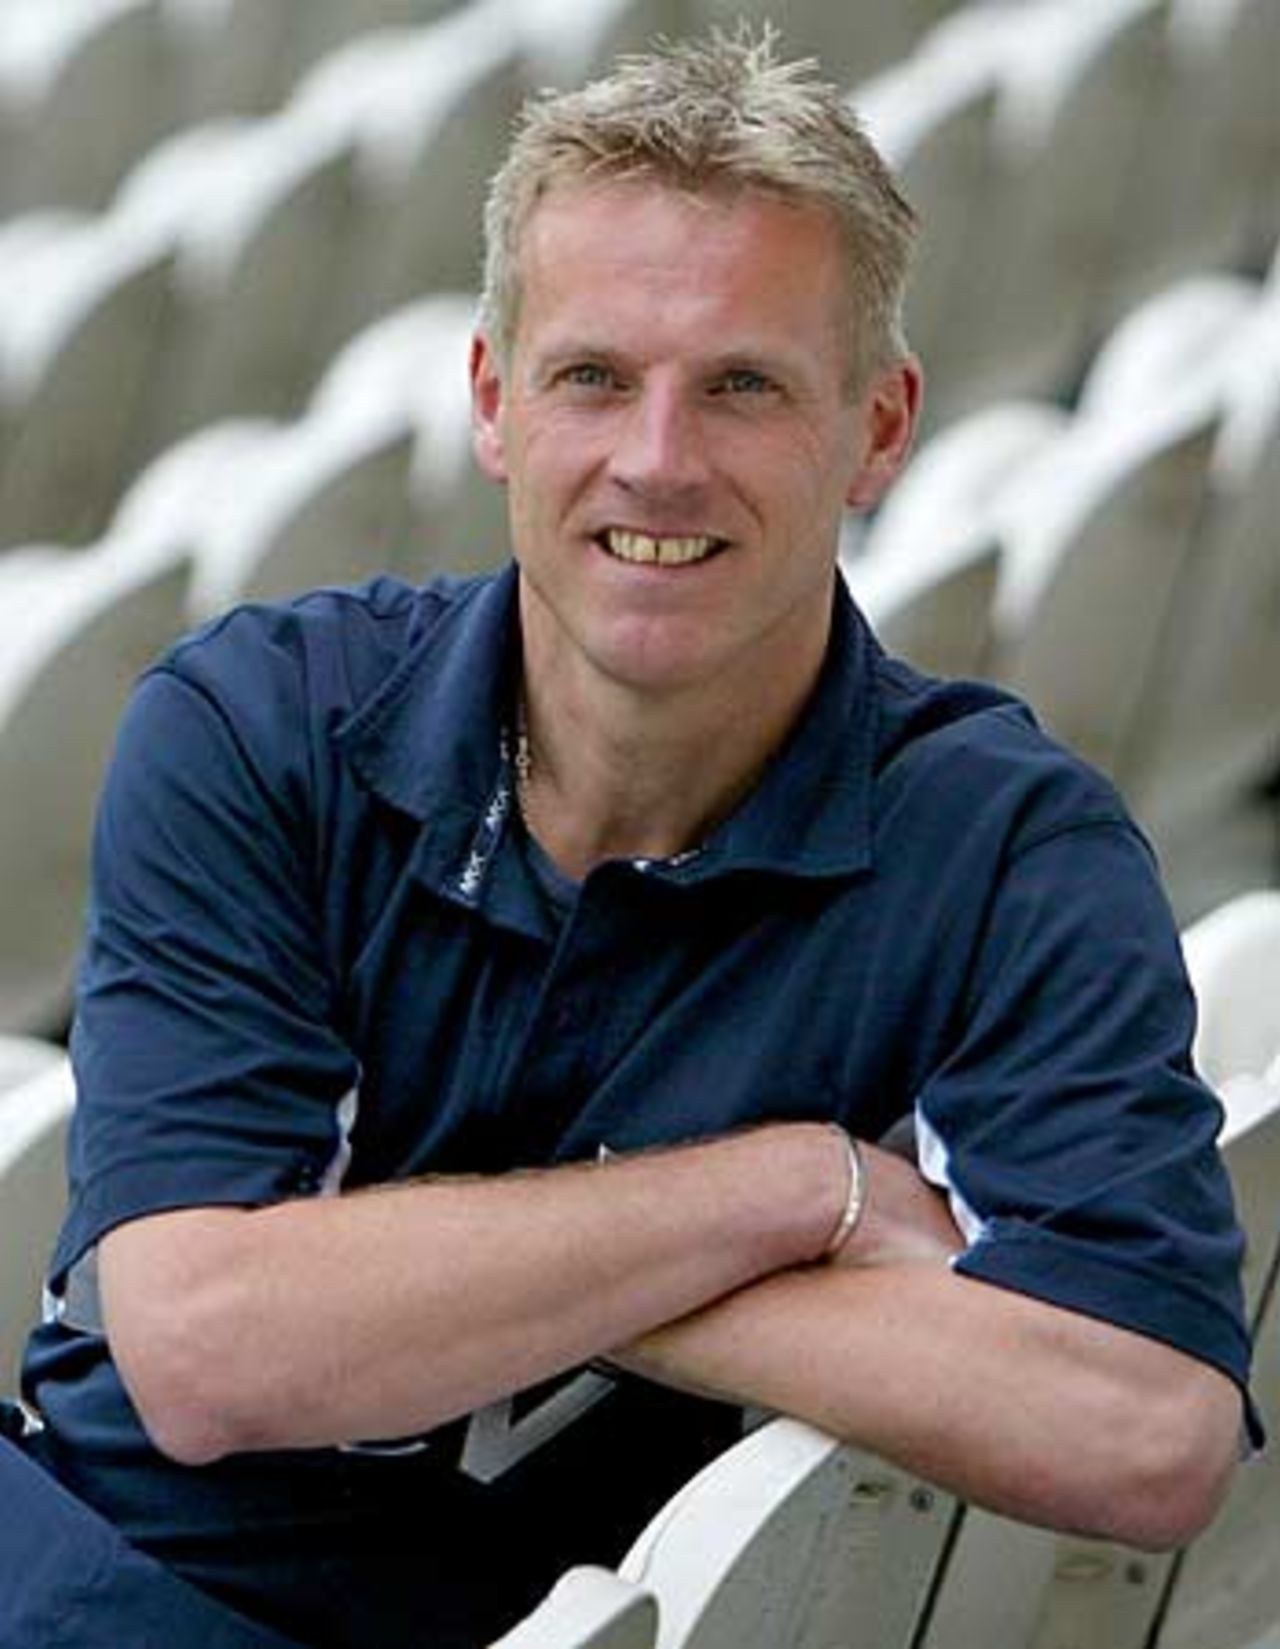 Peter Moores on the day his appointment as ECB academy director was announced, April 14, 2005